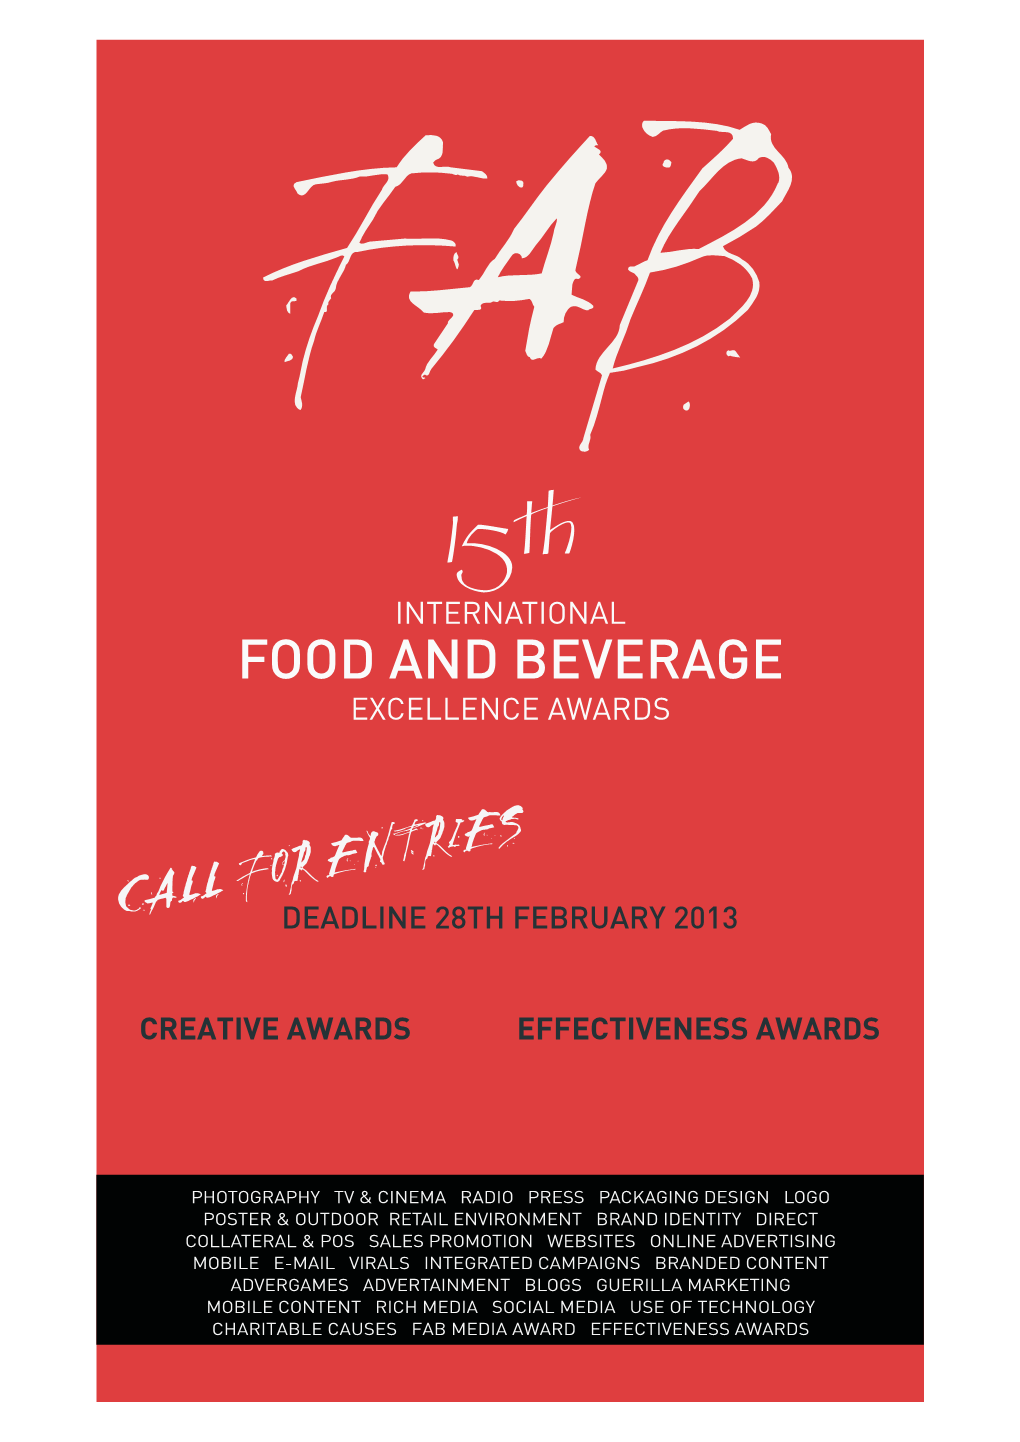 Food and Beverage Excellence Awards